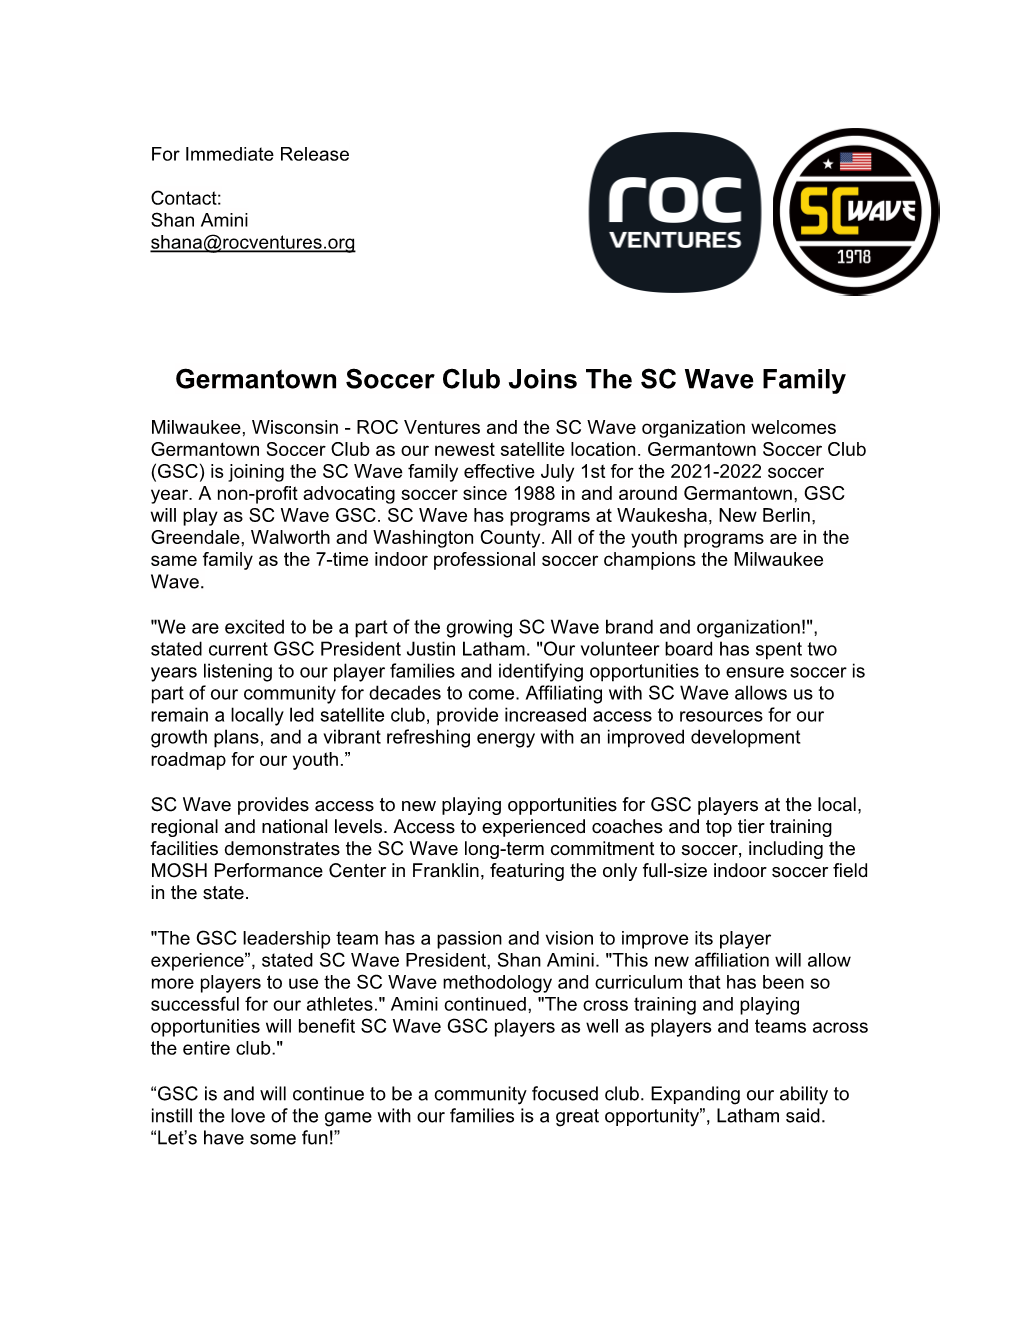 Germantown Soccer Club Joins the SC Wave Family